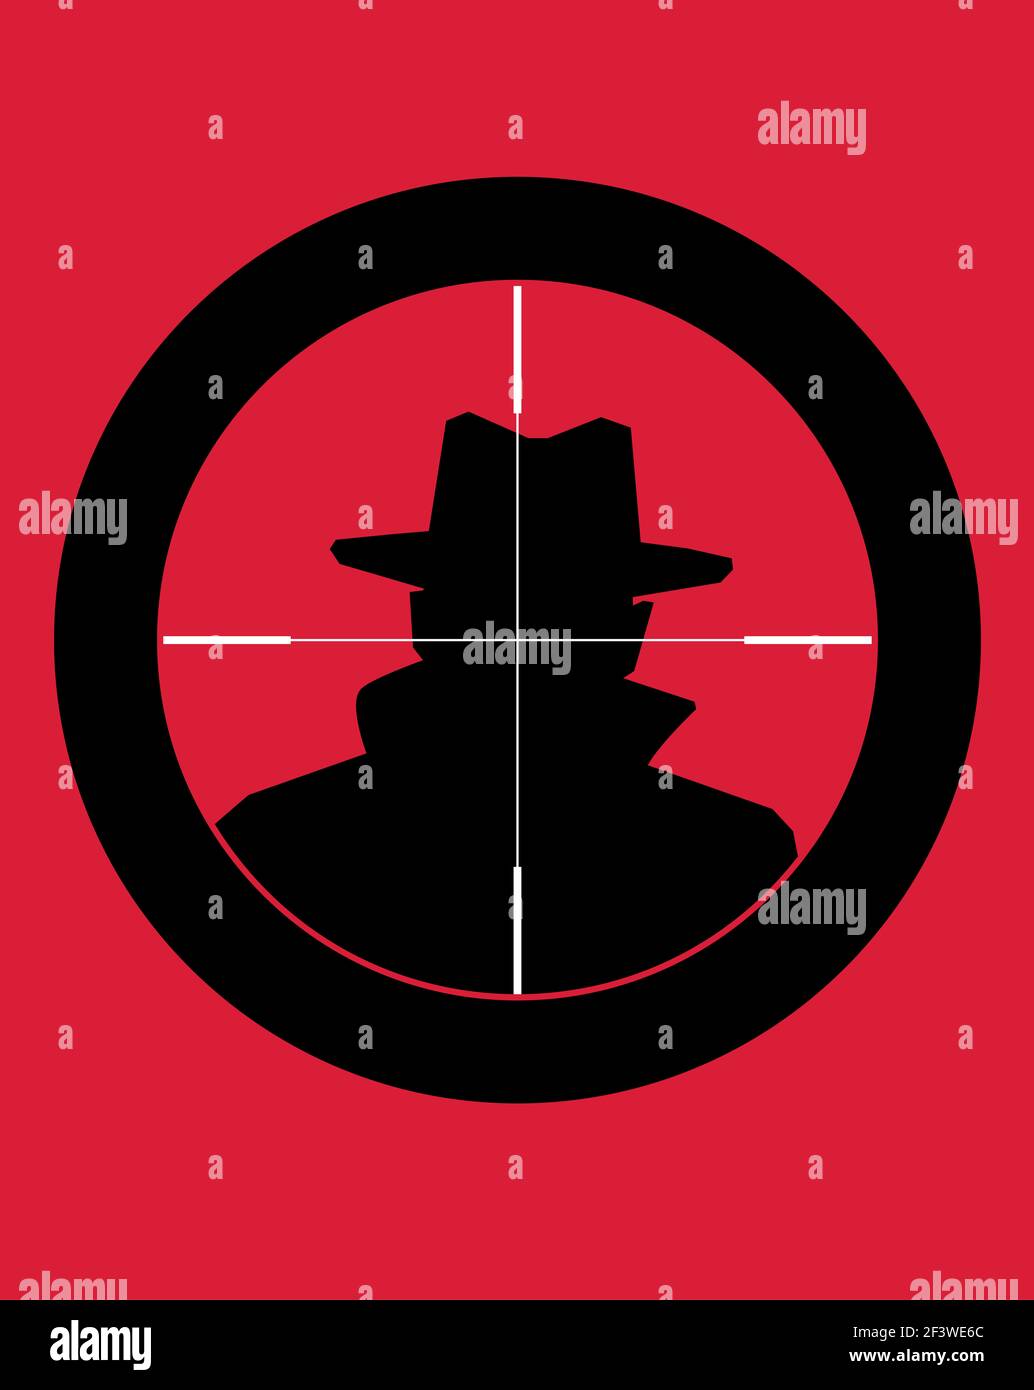 Retro style illustration of man wearing fedora hat and coat in sniper scope. For book covers, posters etc. Stock Photo